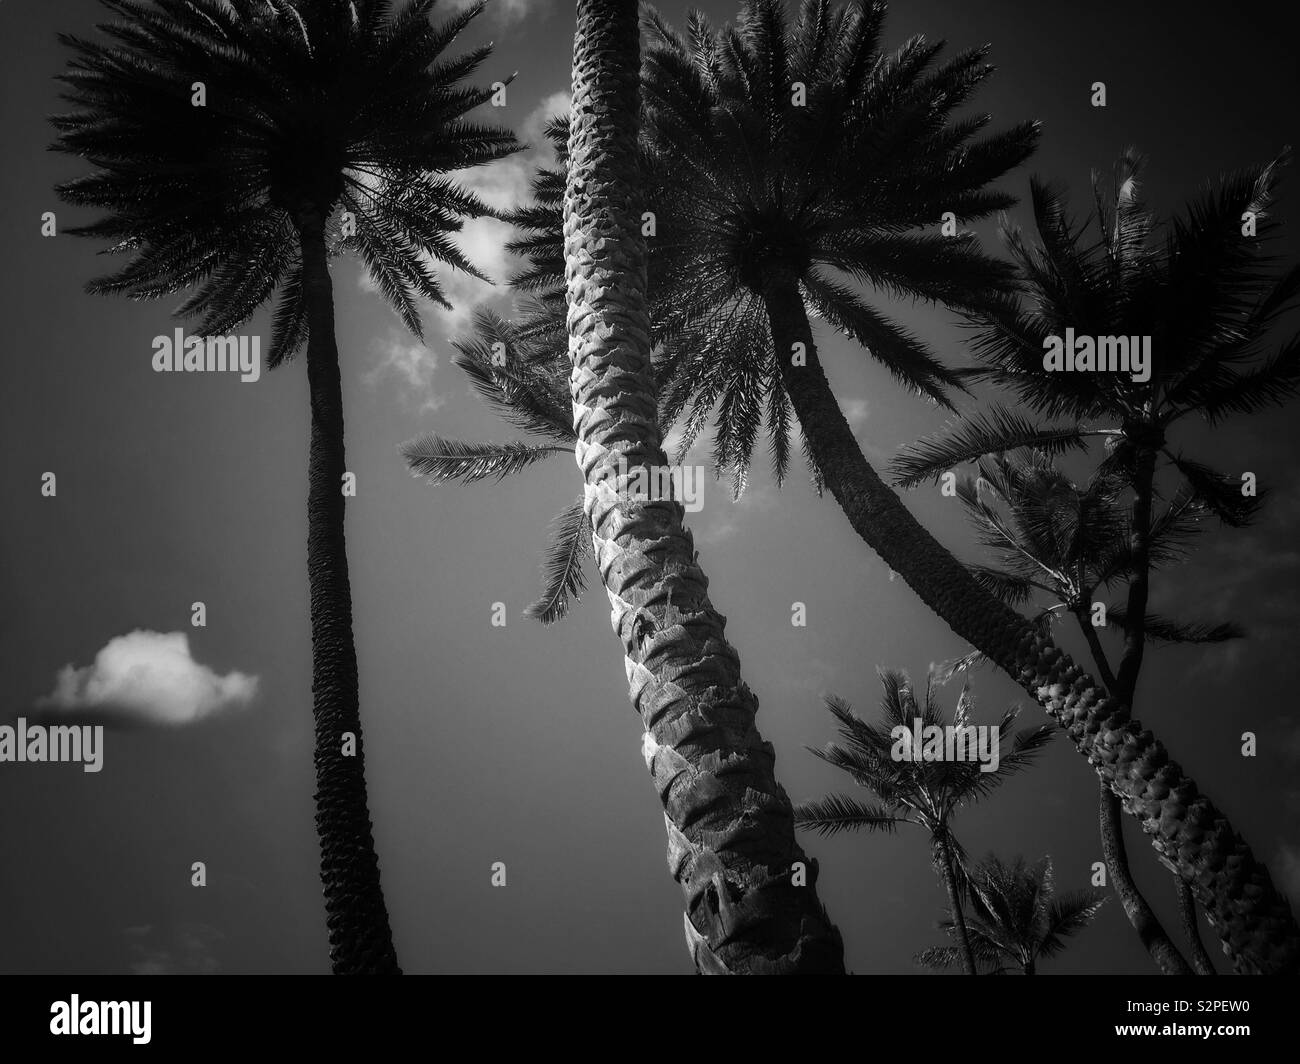 Group of Palm trees in black and white Stock Photo